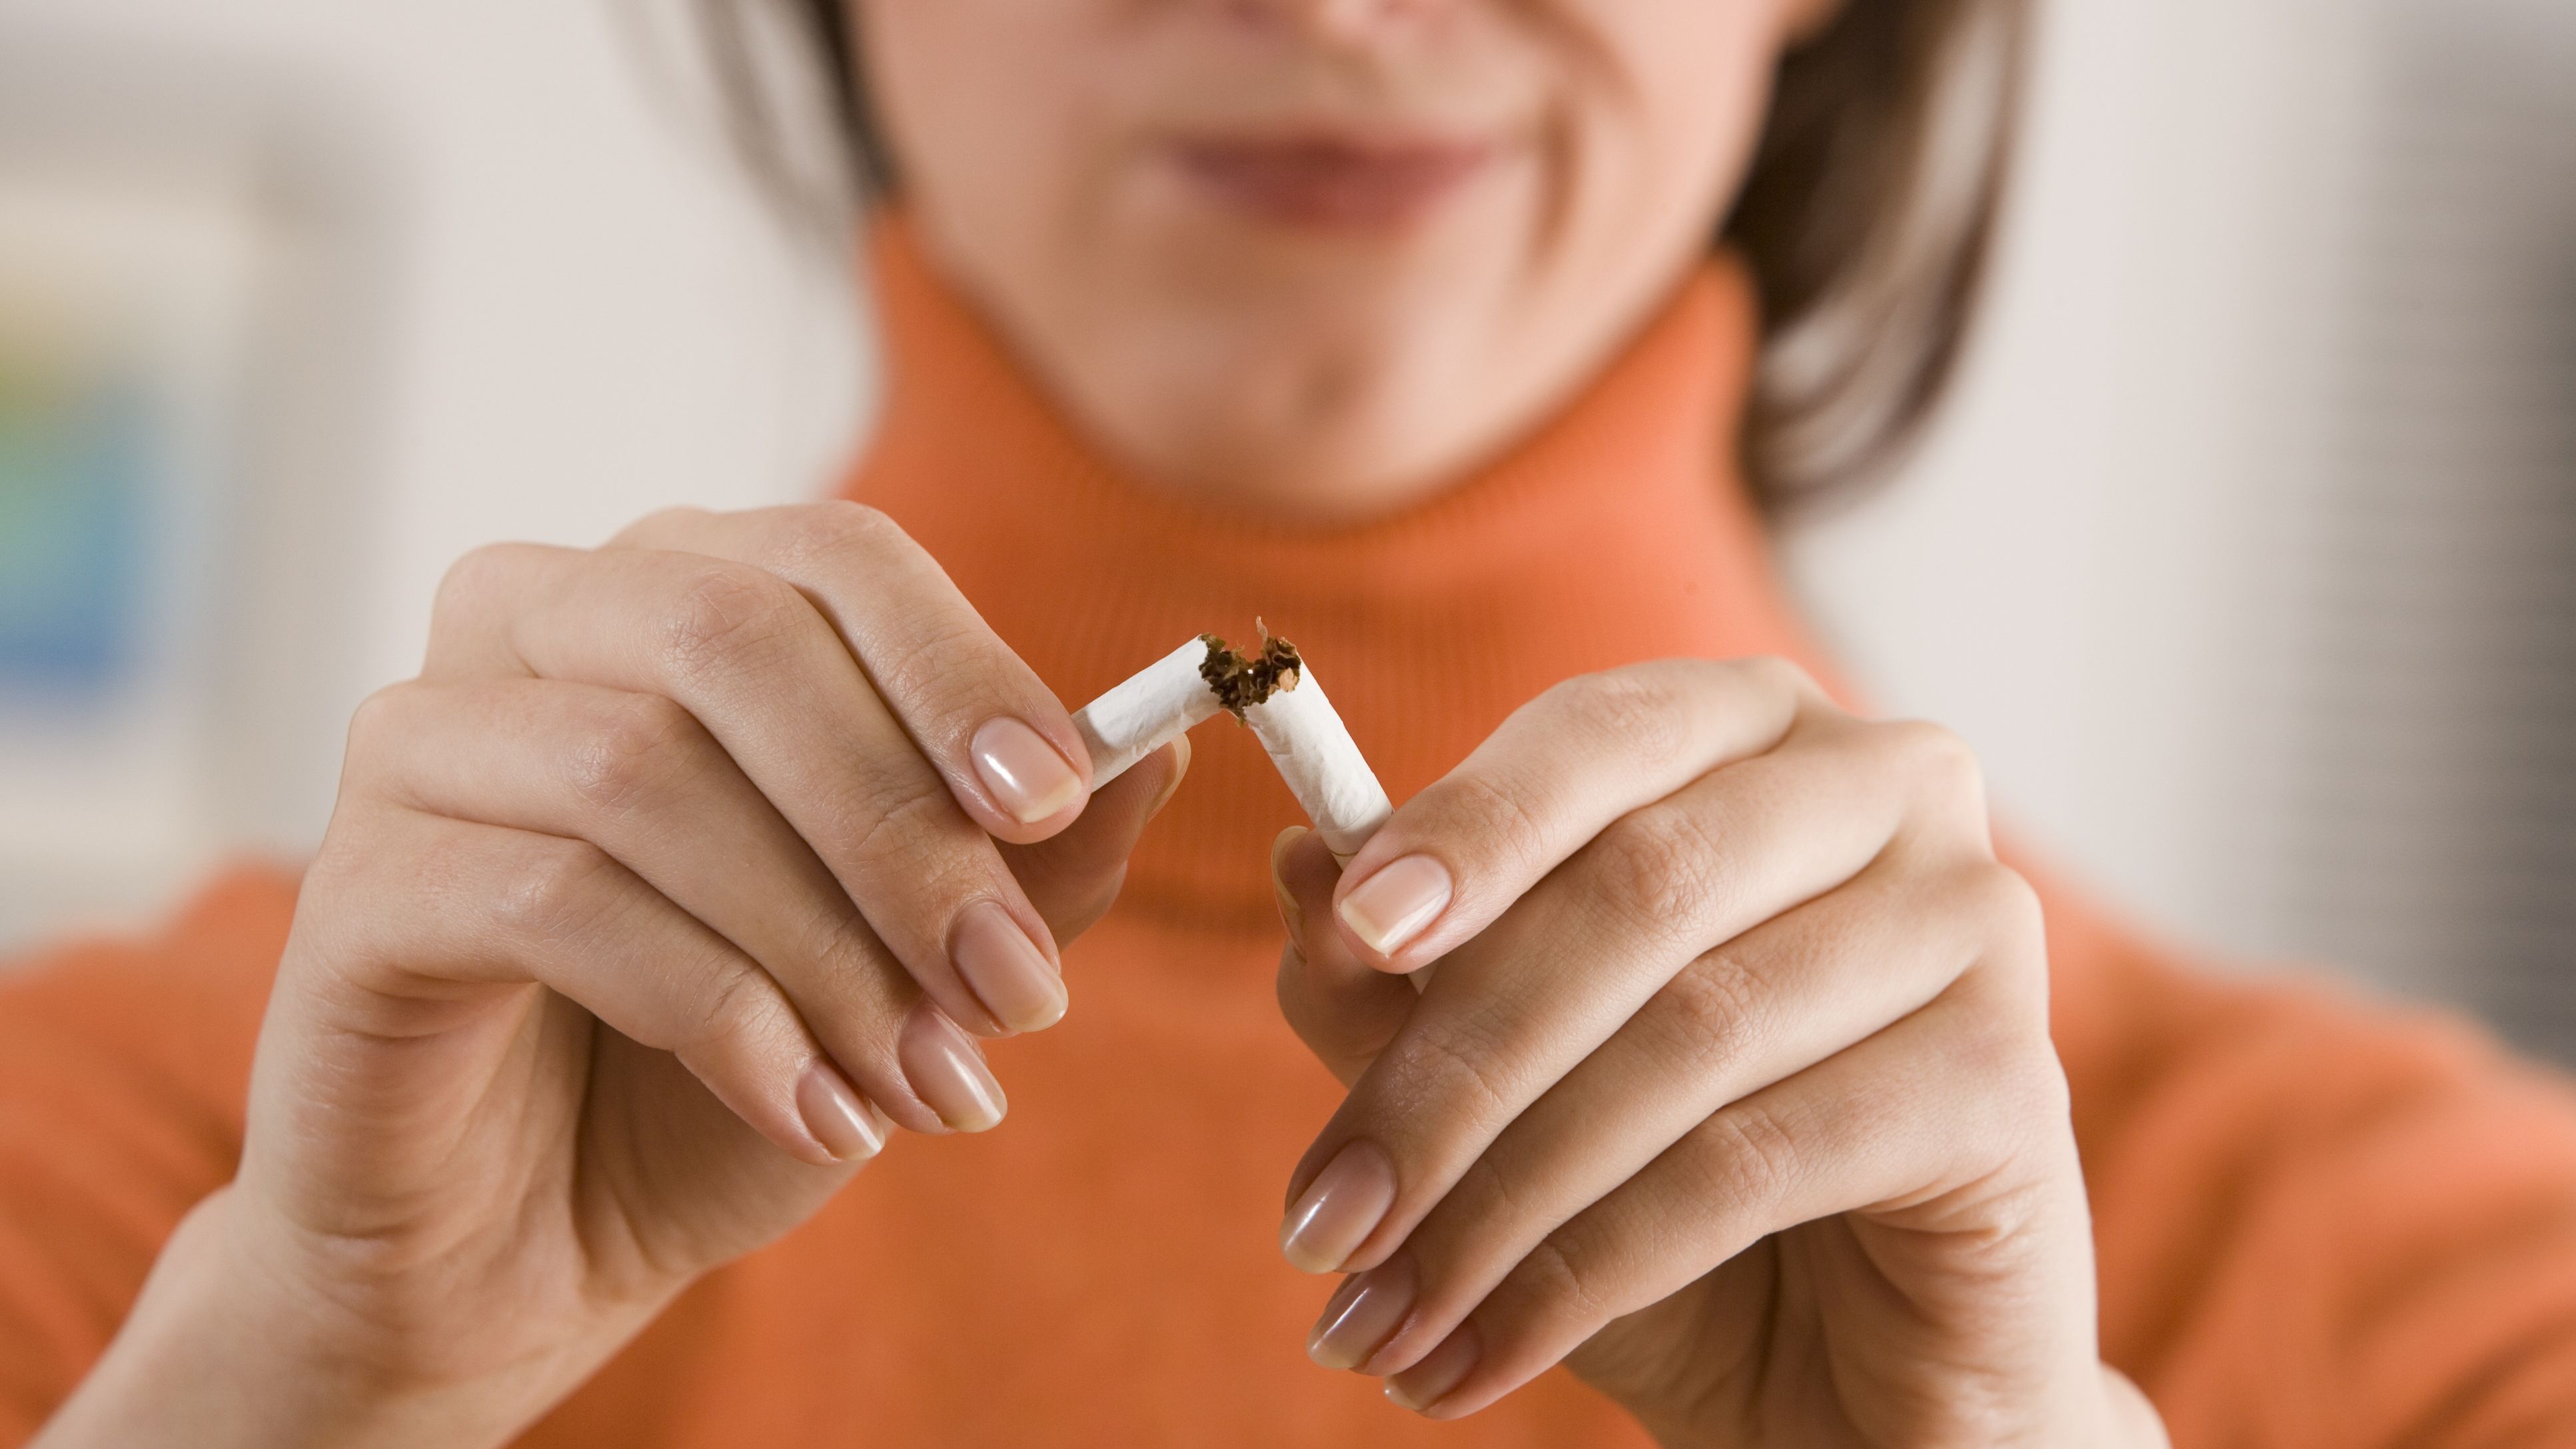 The new study is one of the largest on the hazards of smoking and the benefits of quitting among women born around the 1940s.